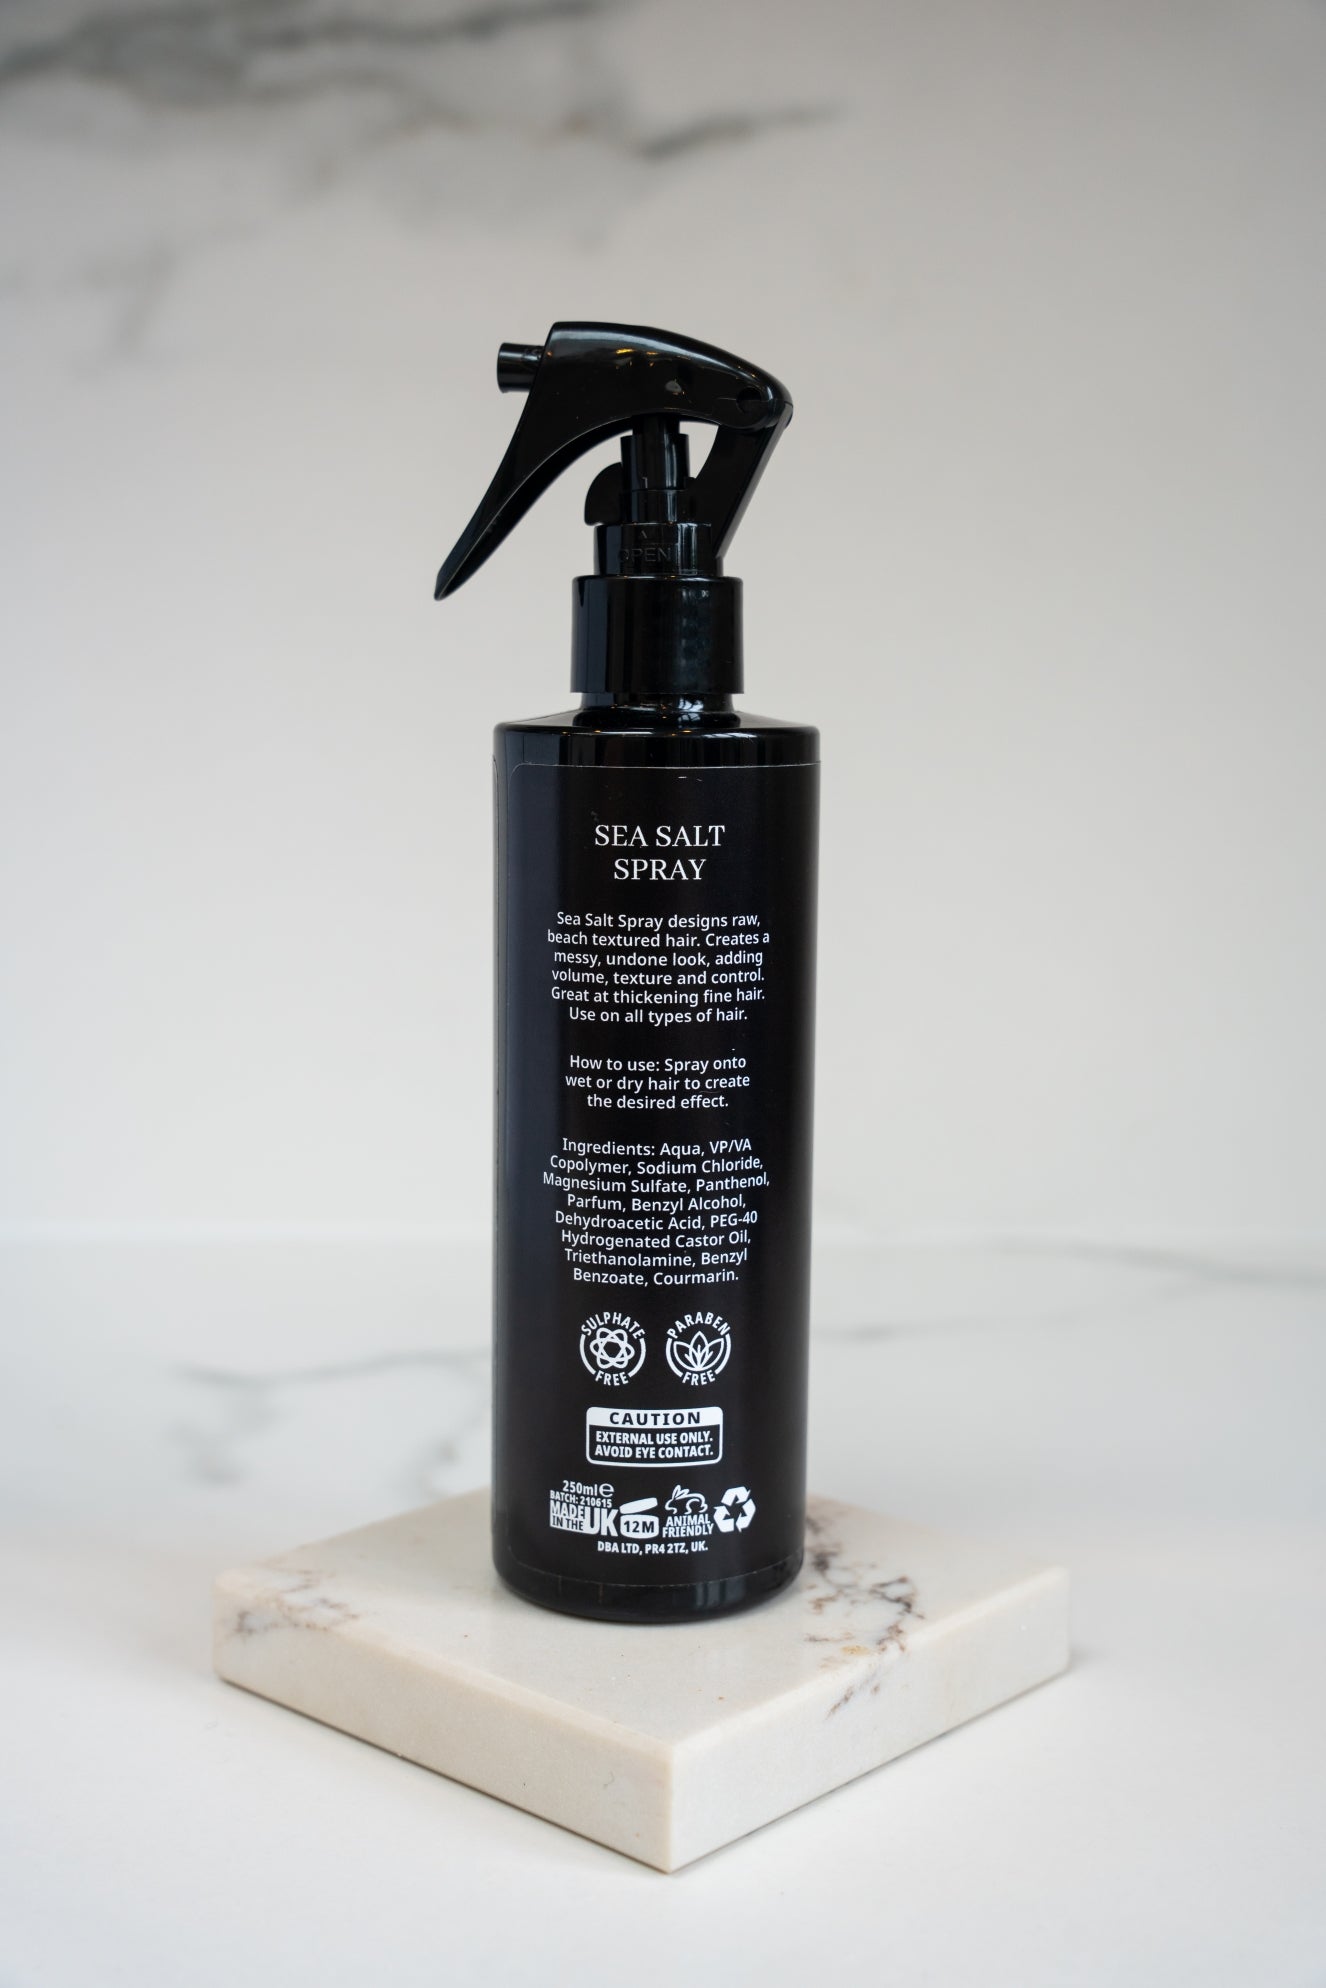 25% Off | Hair Care Collection - The Gent's Collective